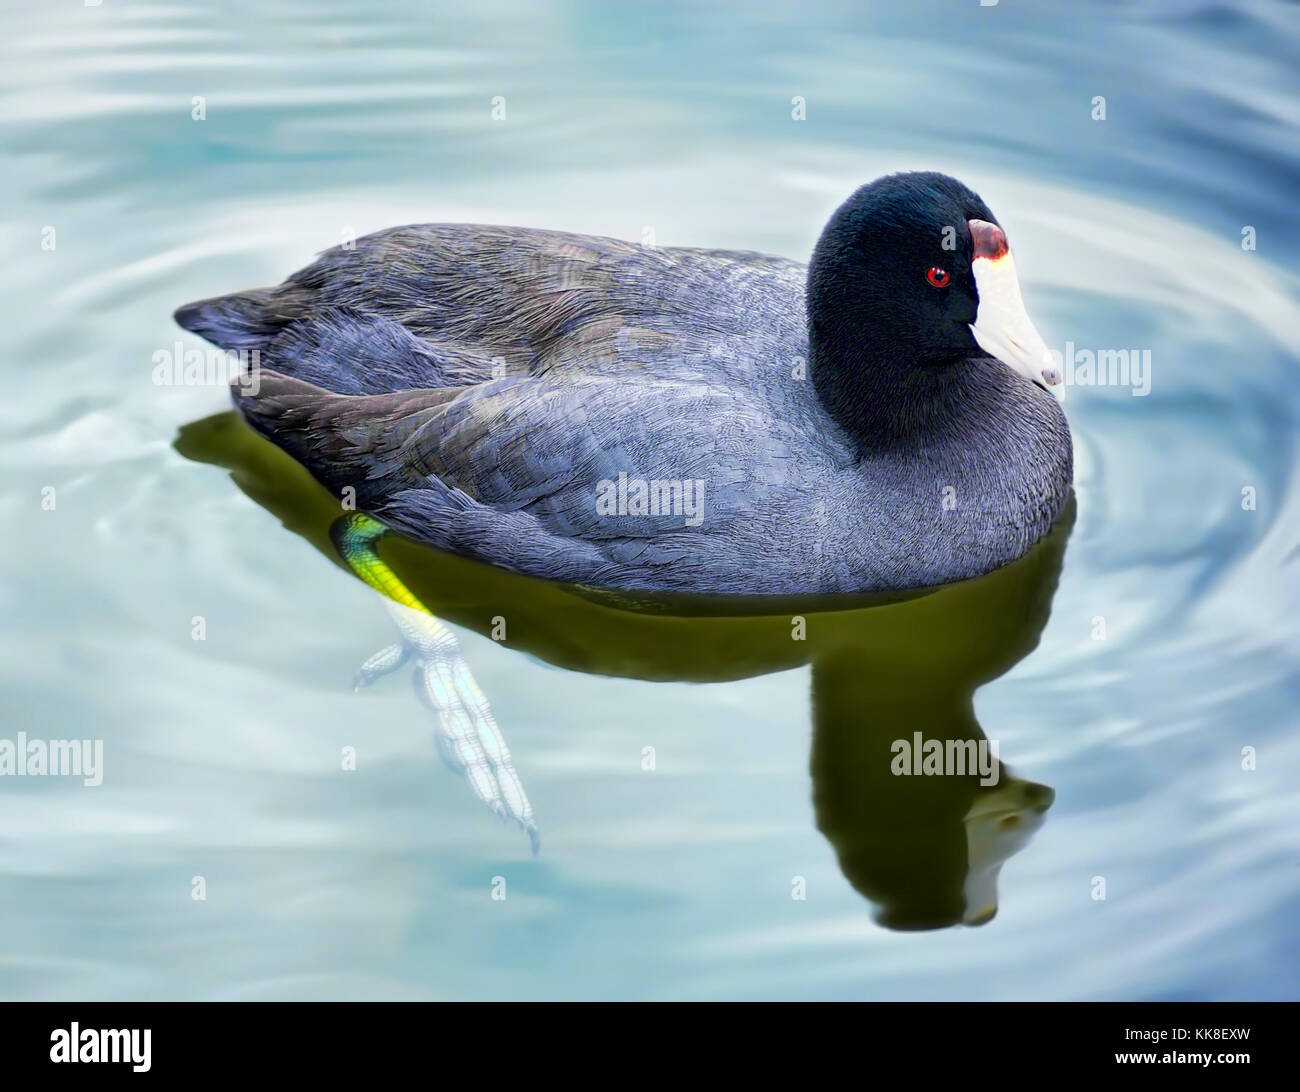 American Coot duck in a pond it's reflect mirrored in the nearly still clear water. Stock Photo